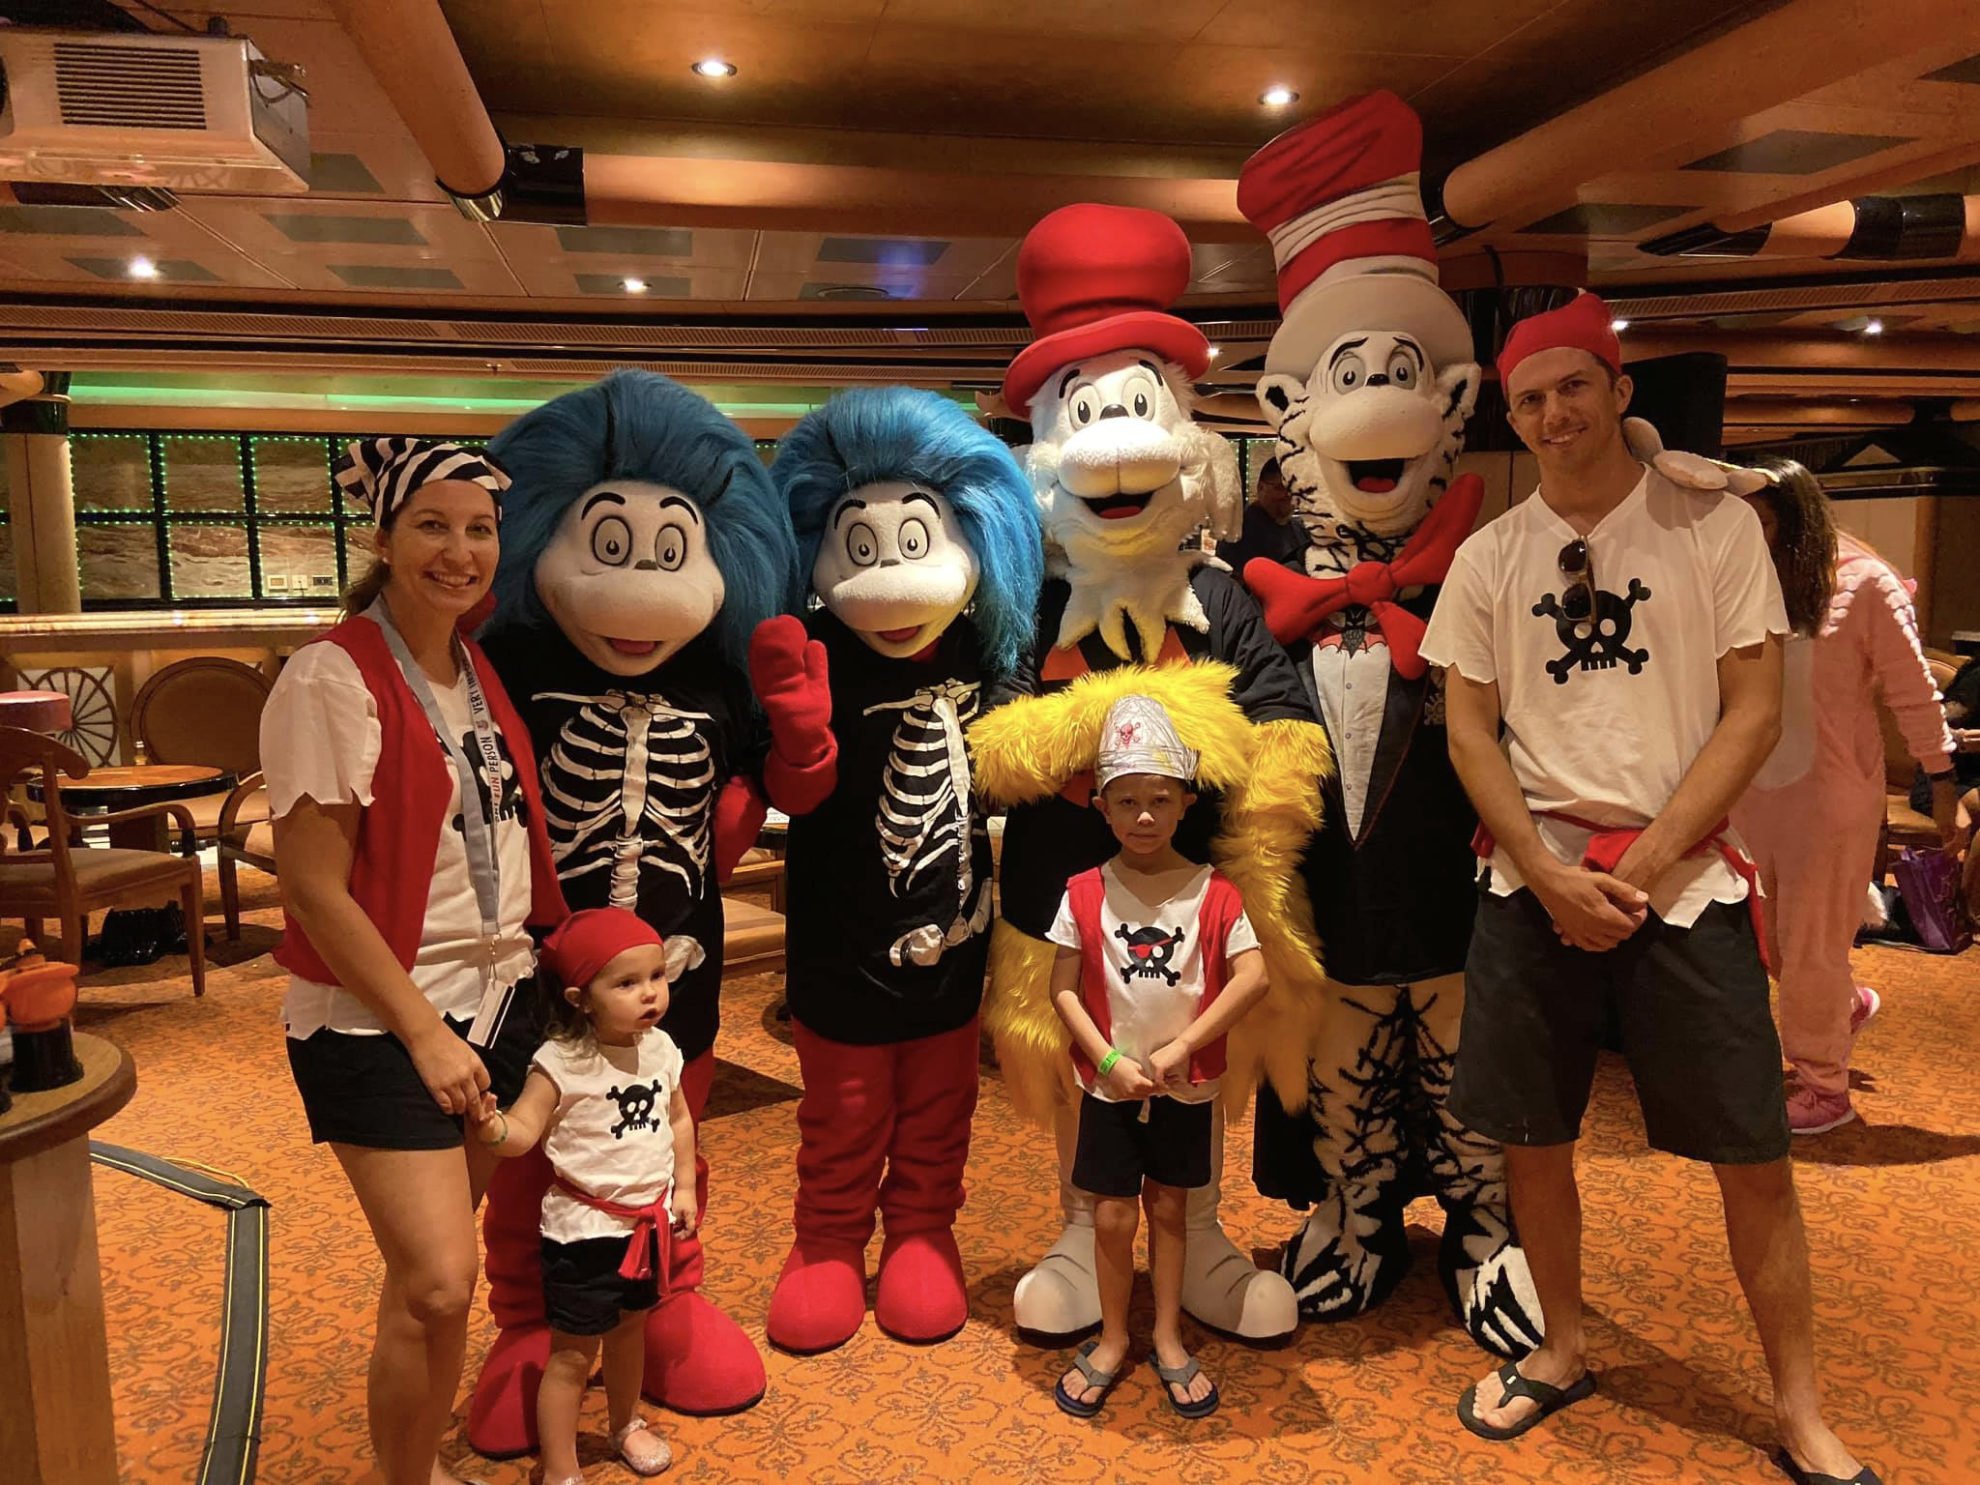 Family dressed as pirates posing with thing 1 and thing 2, sam I am and Cat and the hat.